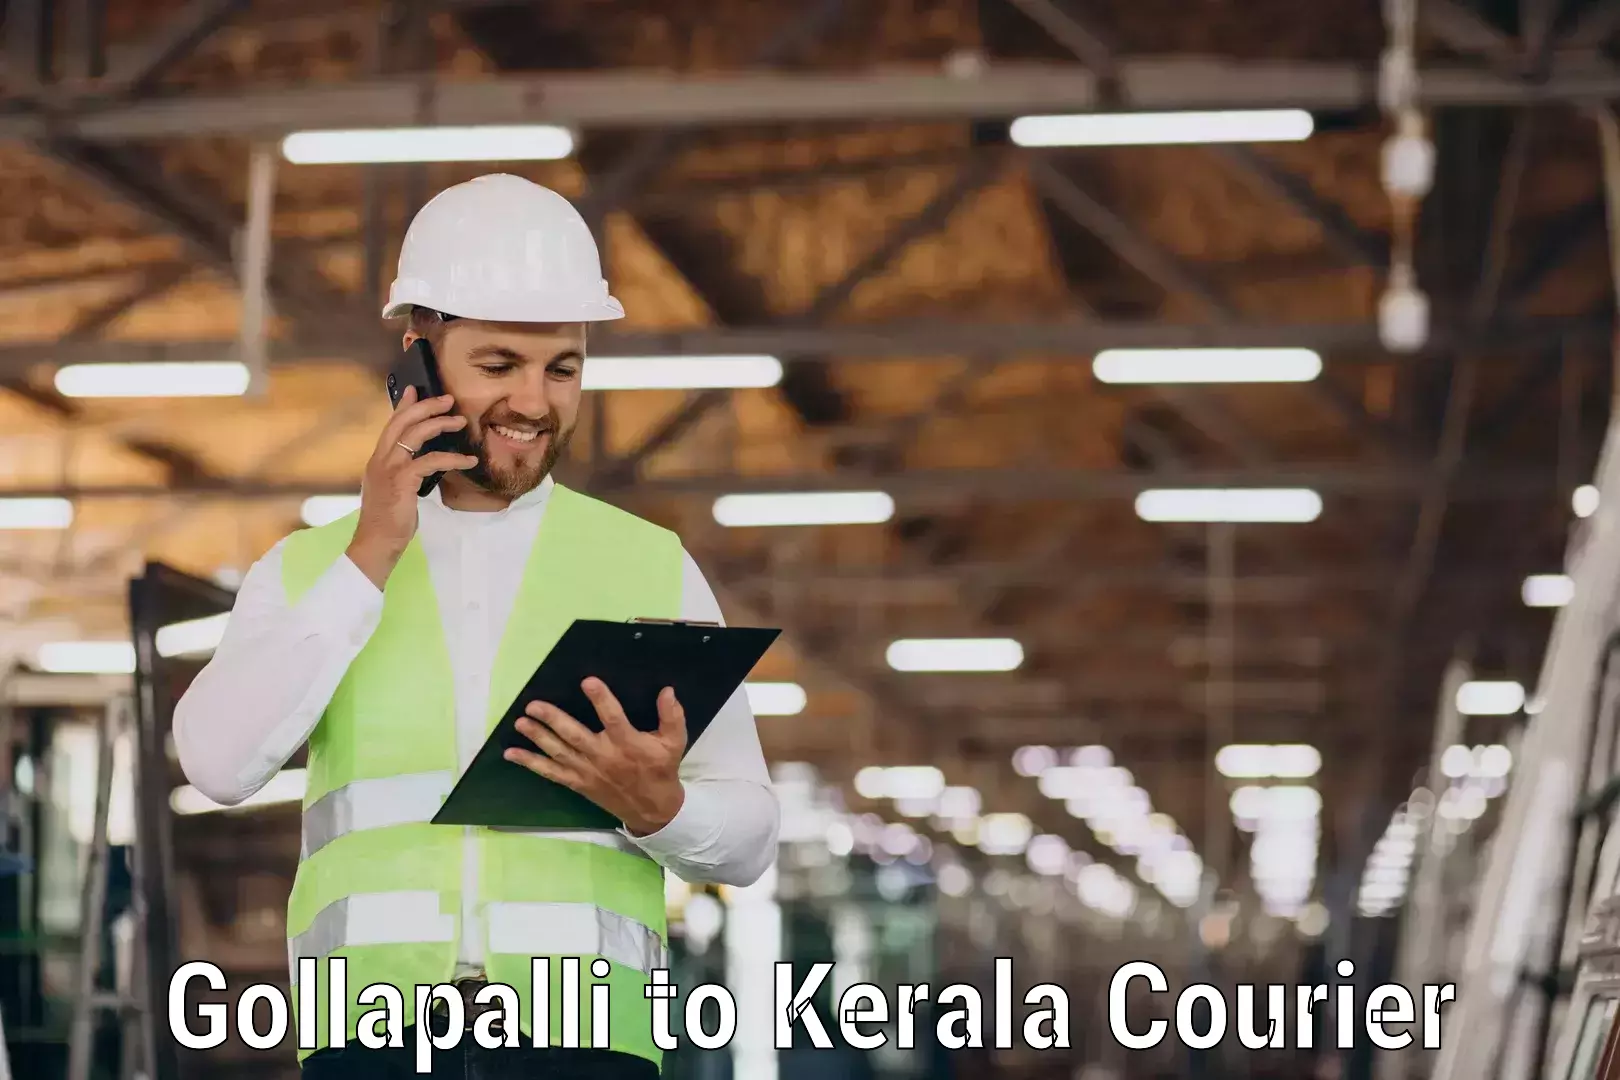 Global shipping networks Gollapalli to Munnar